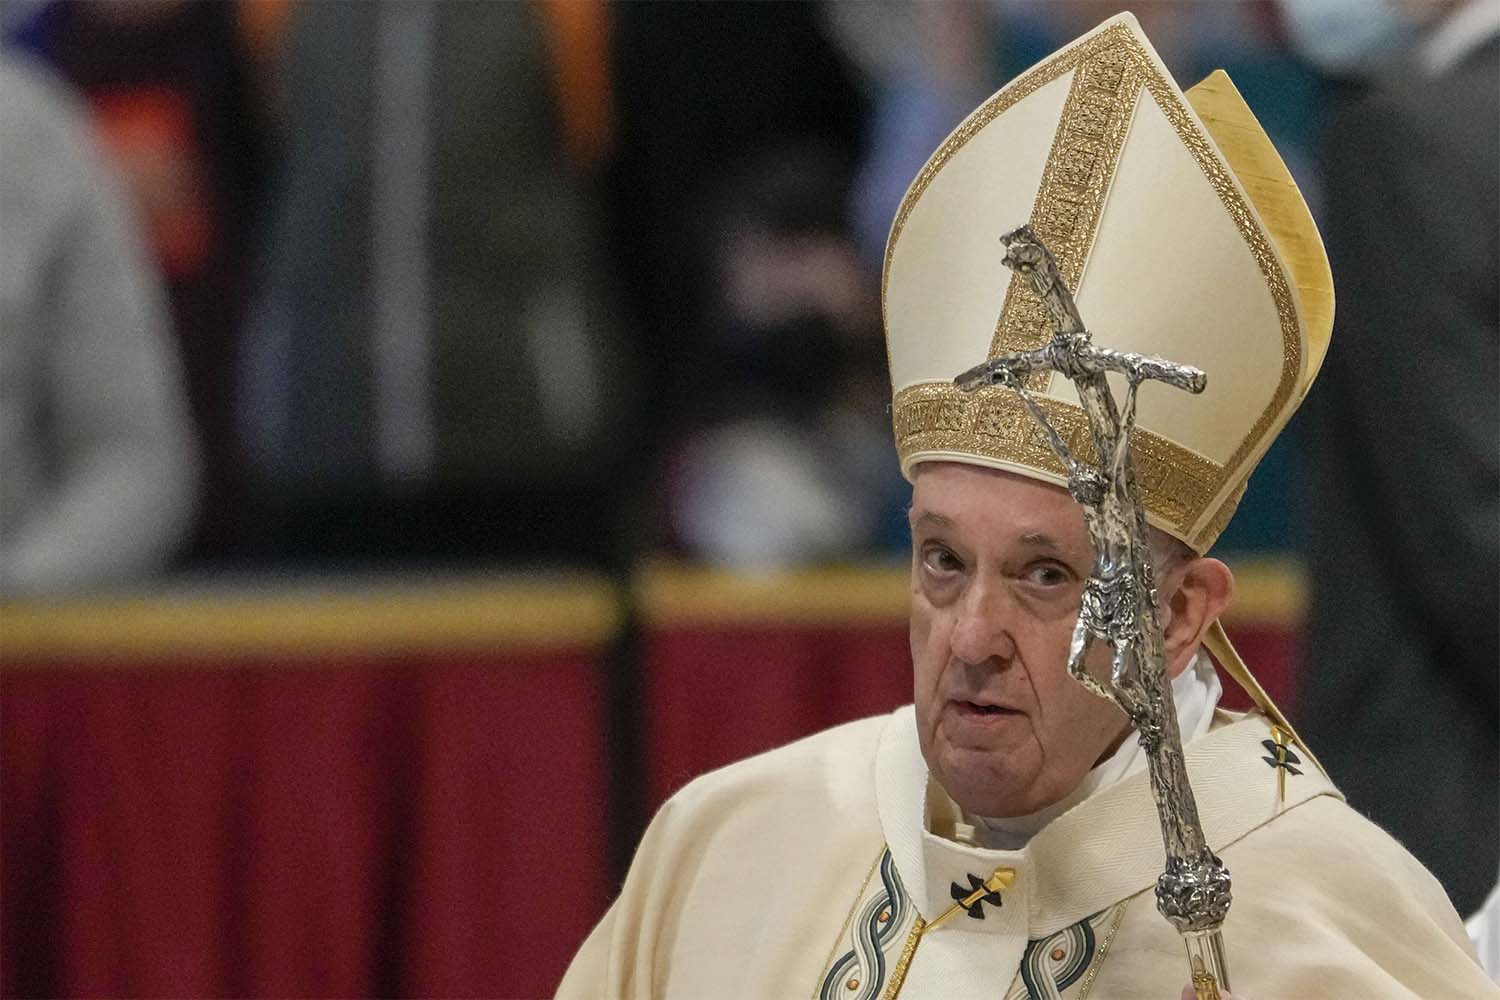 Pope Francis said Lebanon was going through a very difficult, ugly period of its history